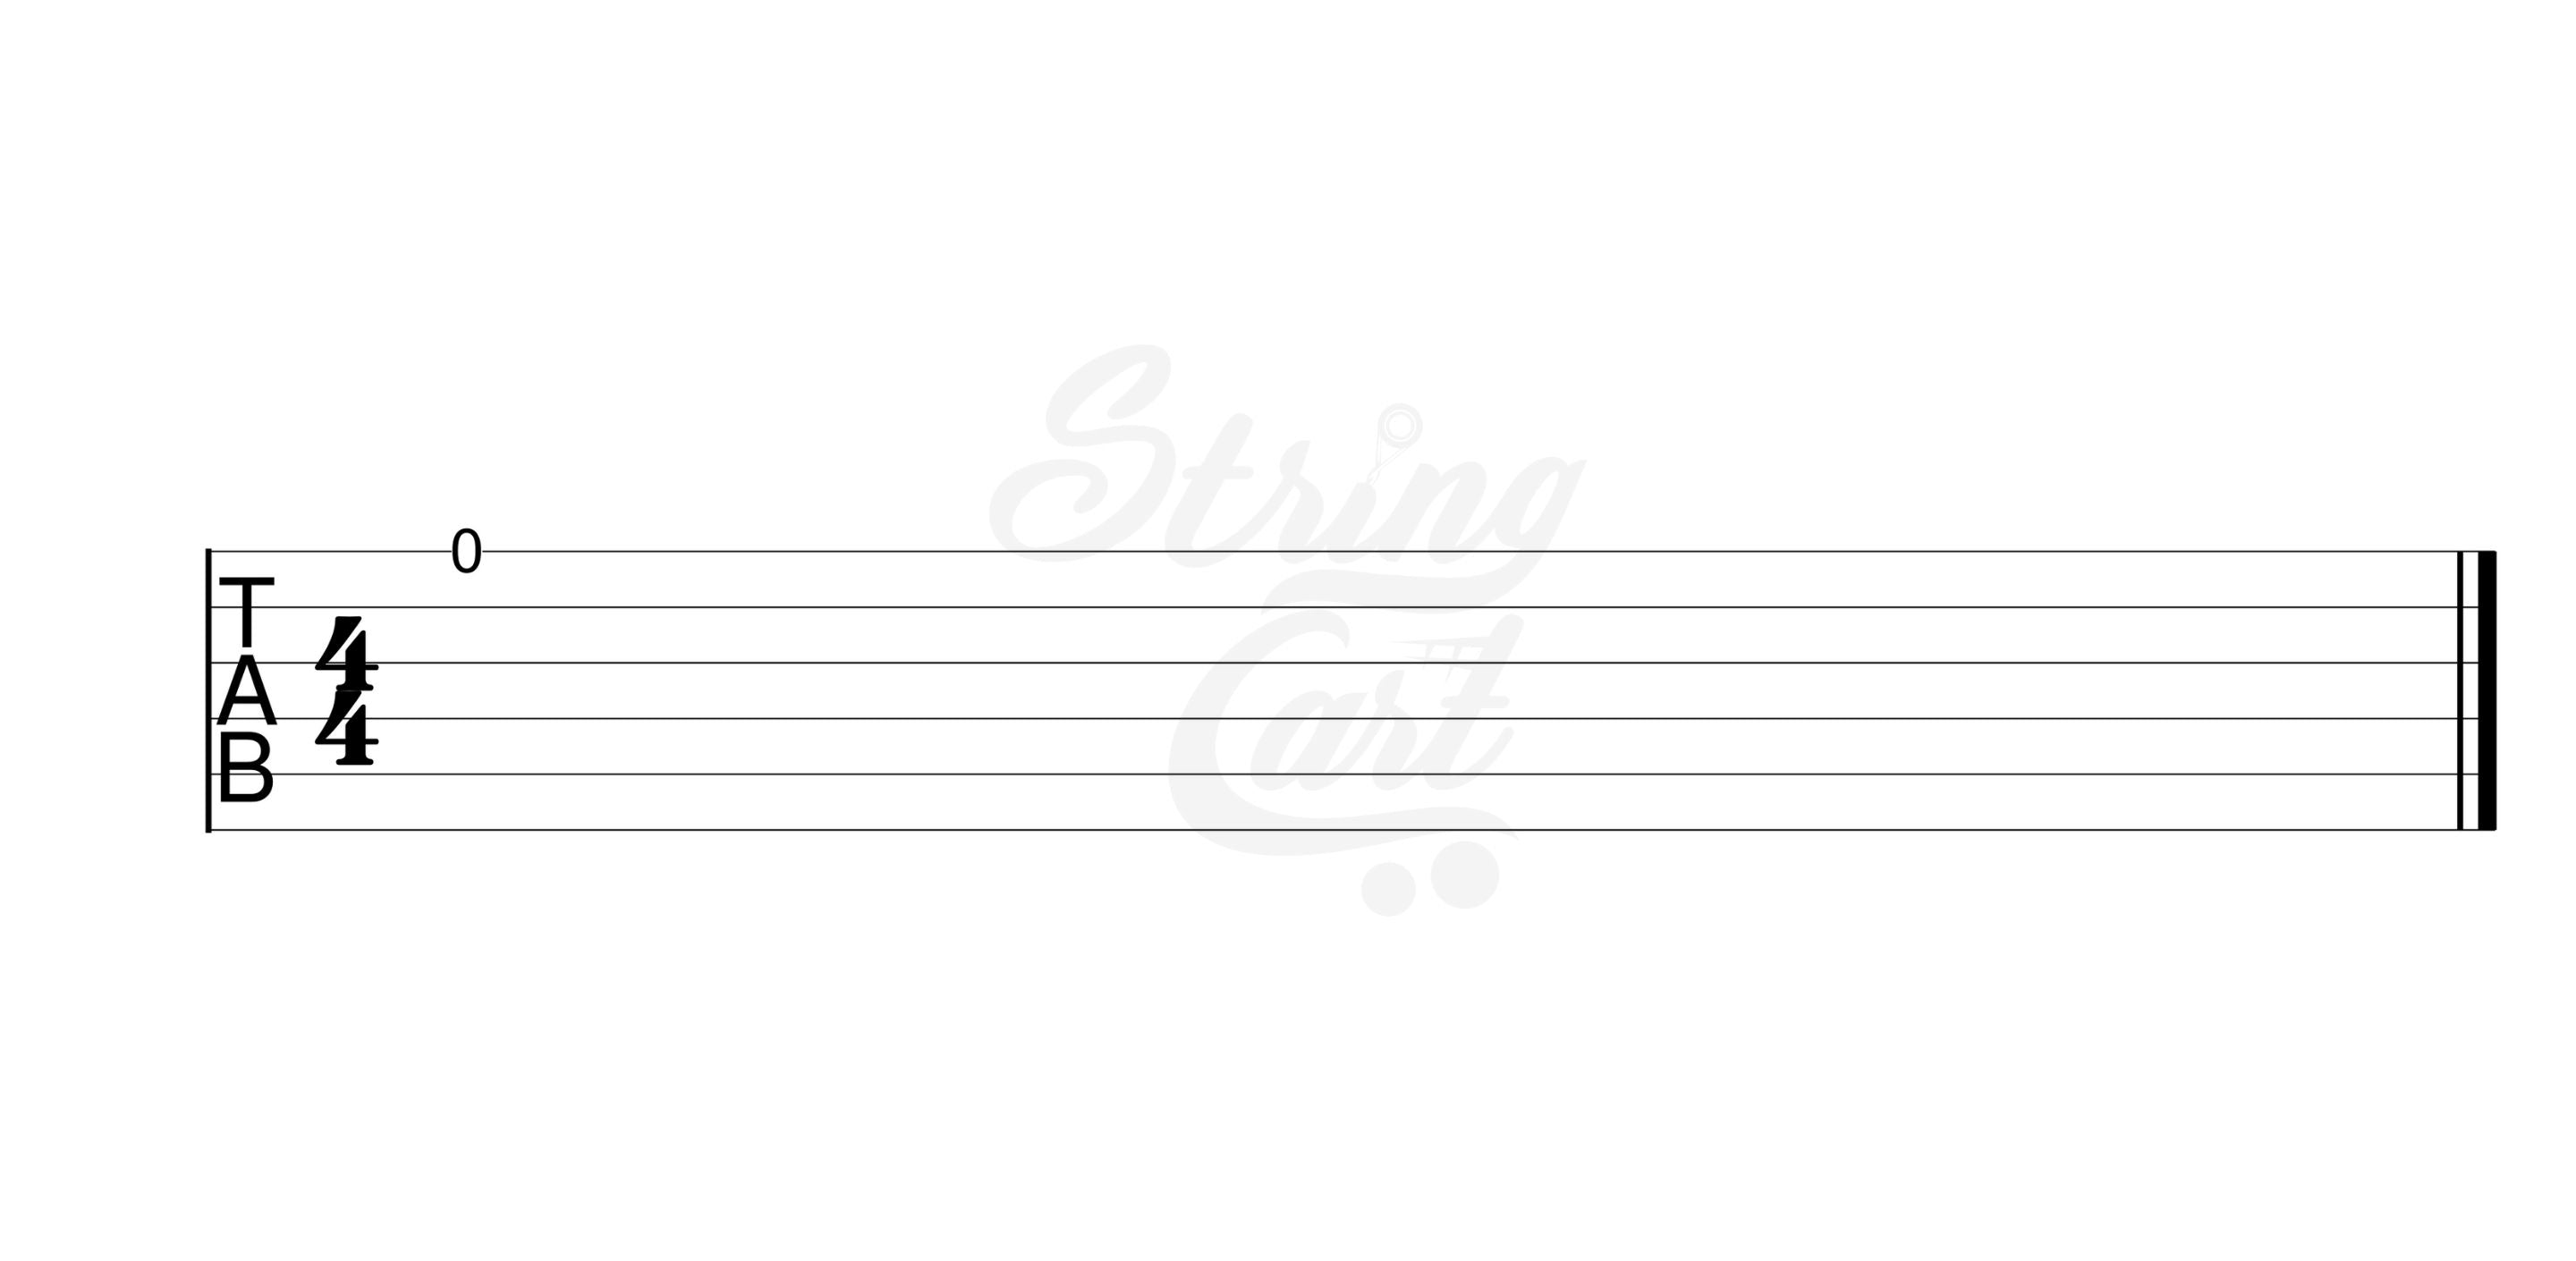 What does 0 mean in Guitar Tabs Image